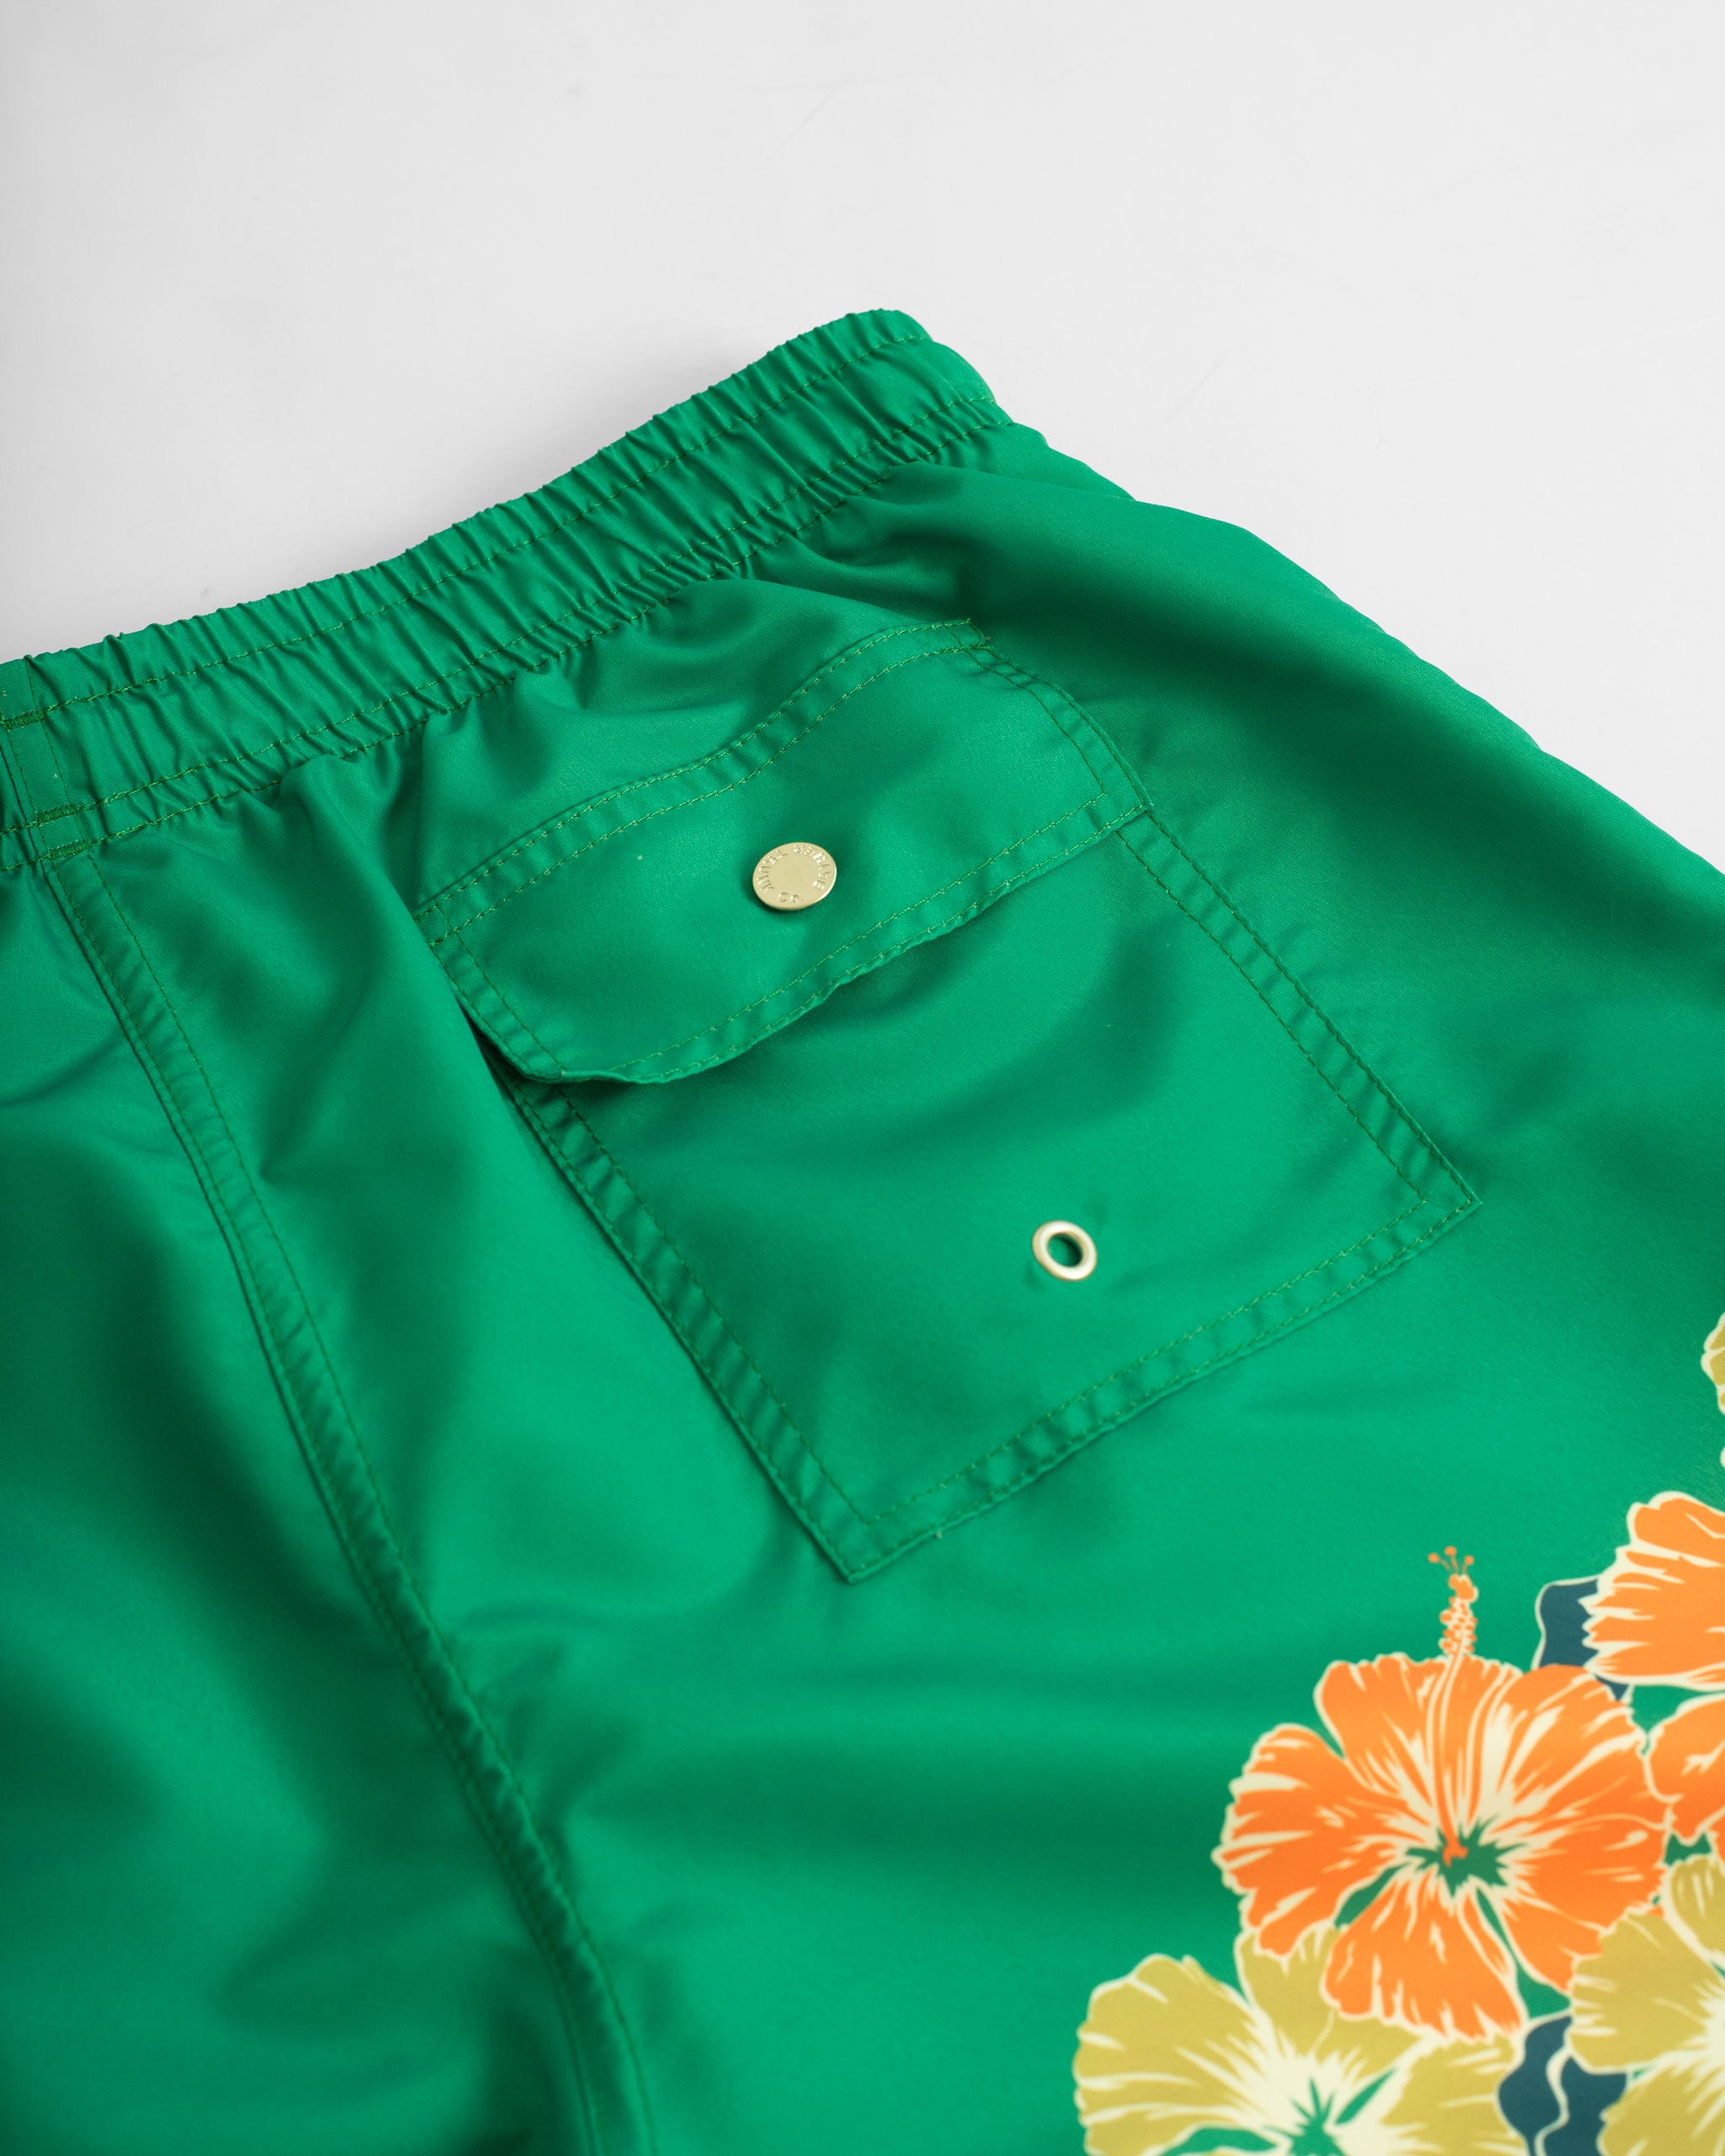 Back Pocket Close Up of Green swim trunk with floral motif pattern on the bottom of the leg